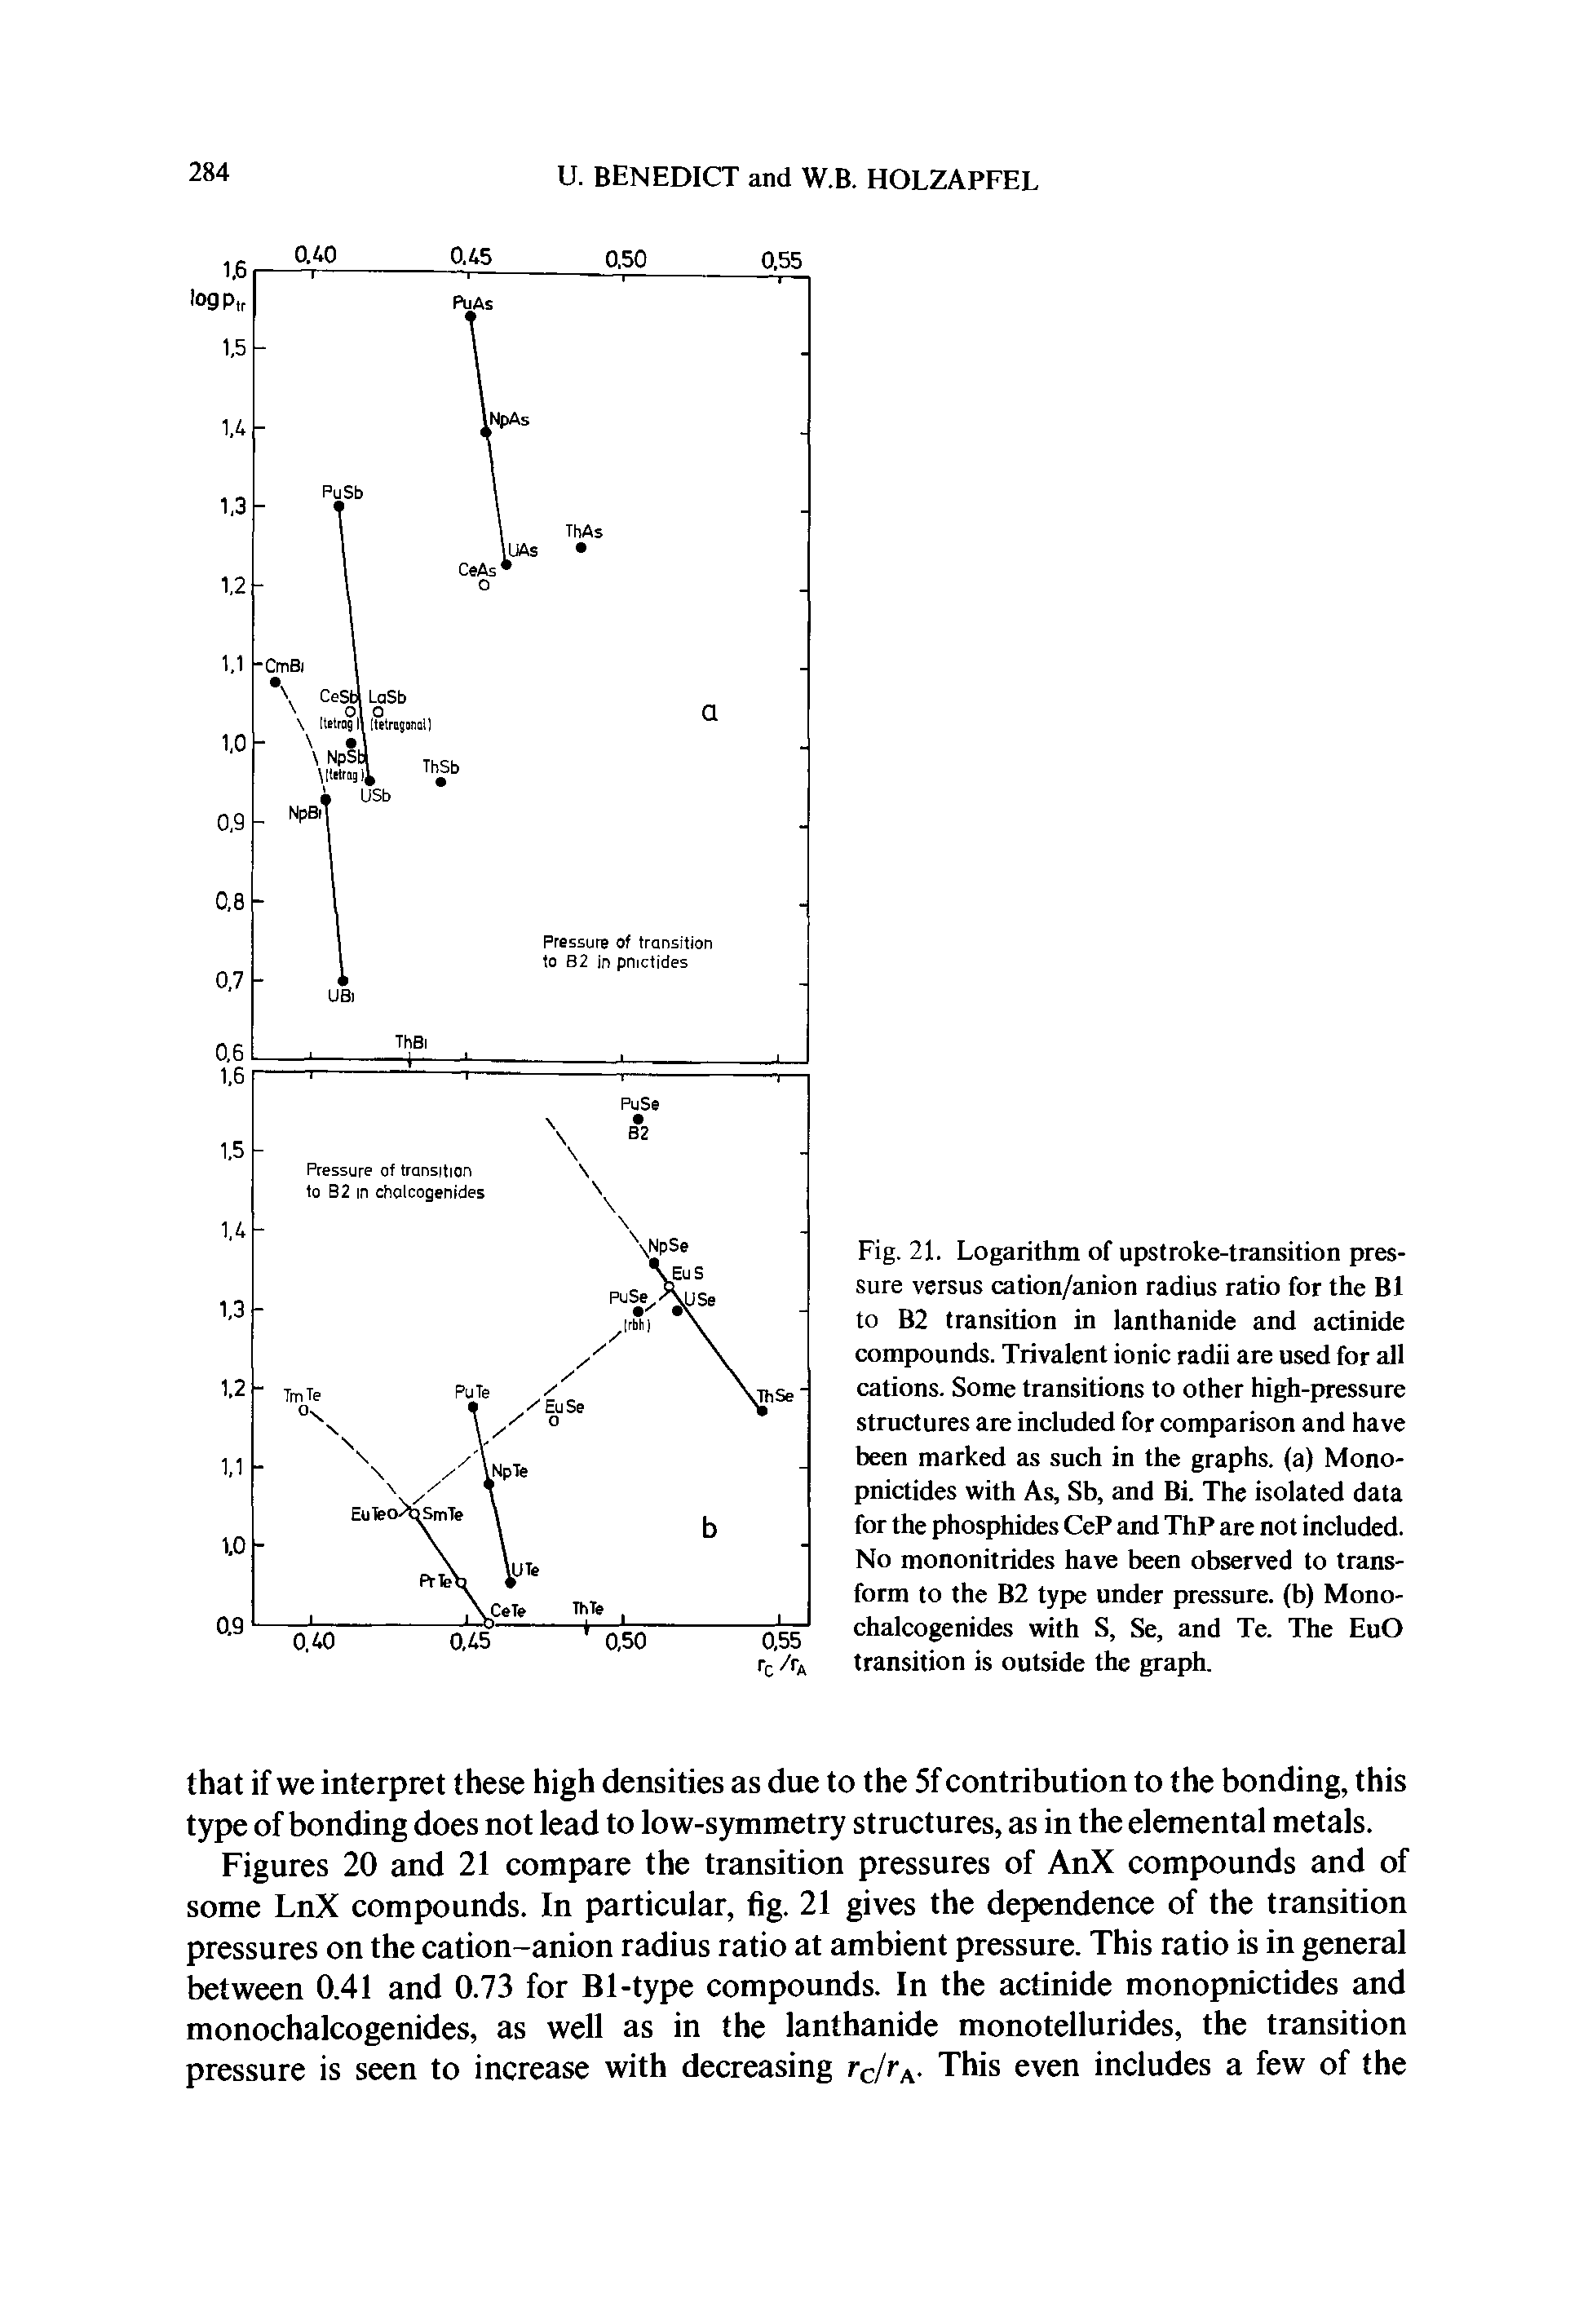 Figures 20 and 21 compare the transition pressures of AnX compounds and of some LnX compounds. In particular, fig. 21 gives the dependence of the transition pressures on the cation-anion radius ratio at ambient pressure. This ratio is in general between 0.41 and 0.73 for Bl-type compounds. In the actinide monopnictides and monochalcogenides, as well as in the lanthanide monotellurides, the transition pressure is seen to increase with decreasing rdv/. This even includes a few of the...